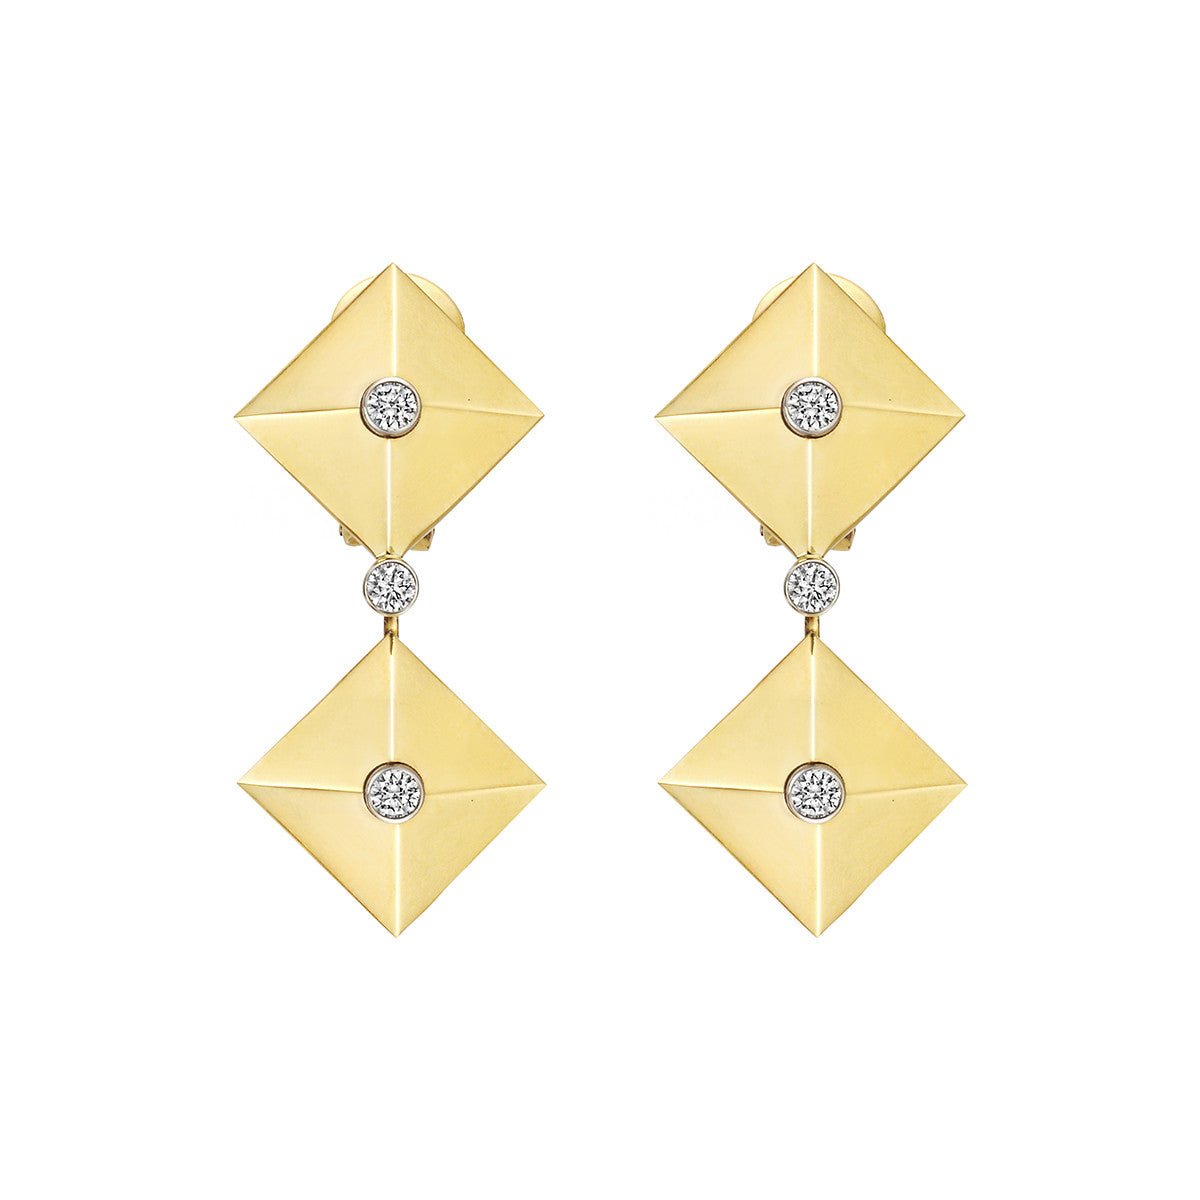 Aletto Brothers - 18k Yellow Gold Diamond Pyramid Drop Earrings